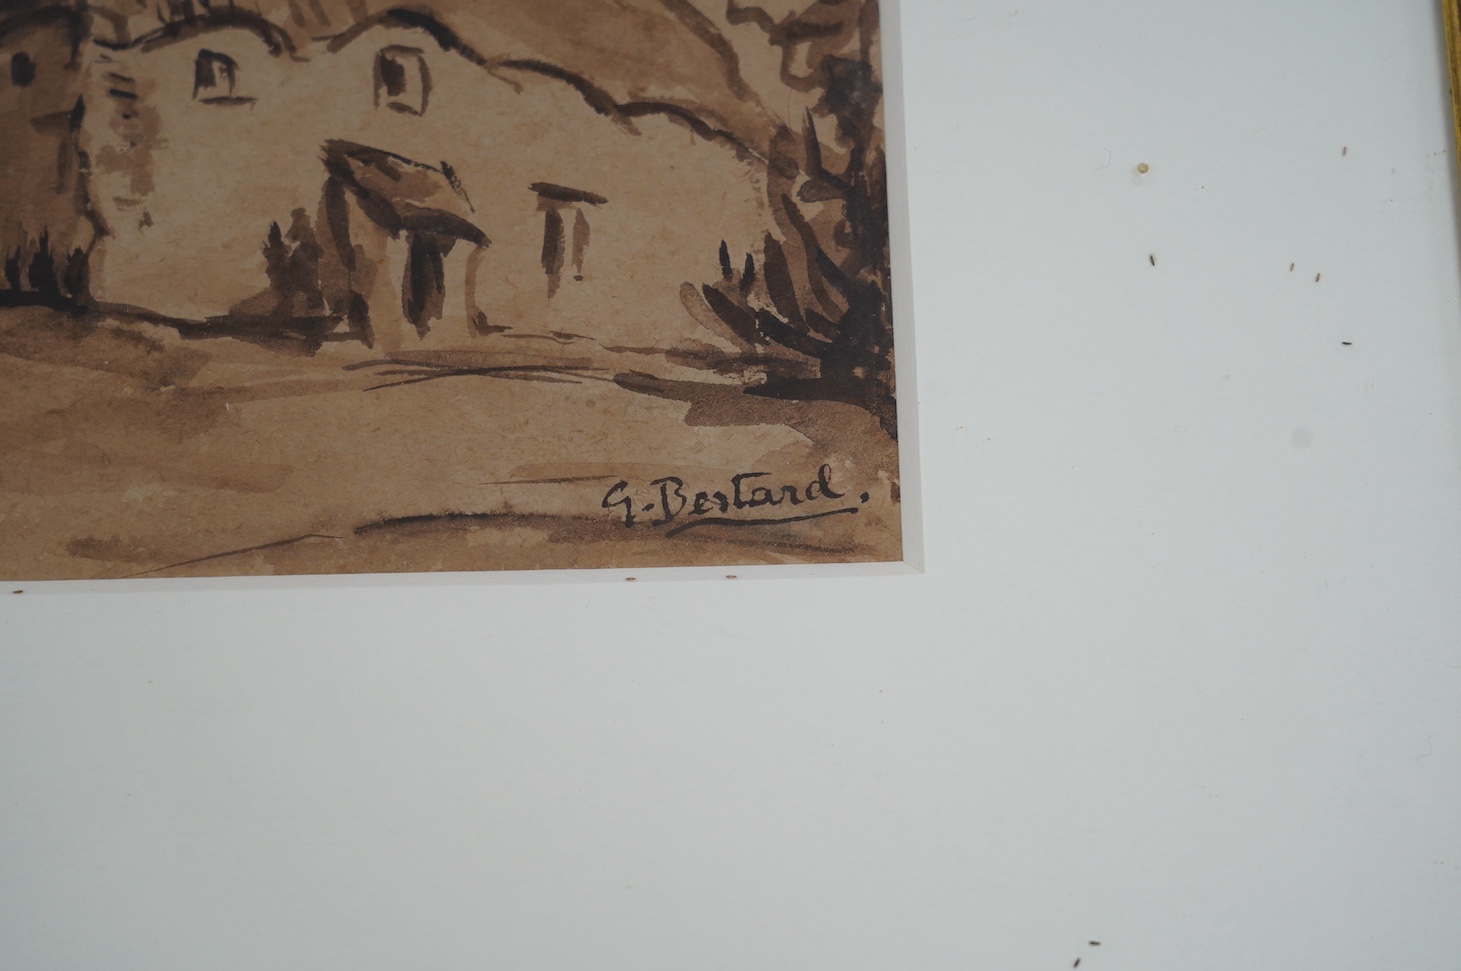 From the Studio of Fred Cuming. G. Bertrand, sepia watercolour, Study of a thatched cottage, signed, 13.5 x 18.5cm. Condition - fair, discolouration to the paper